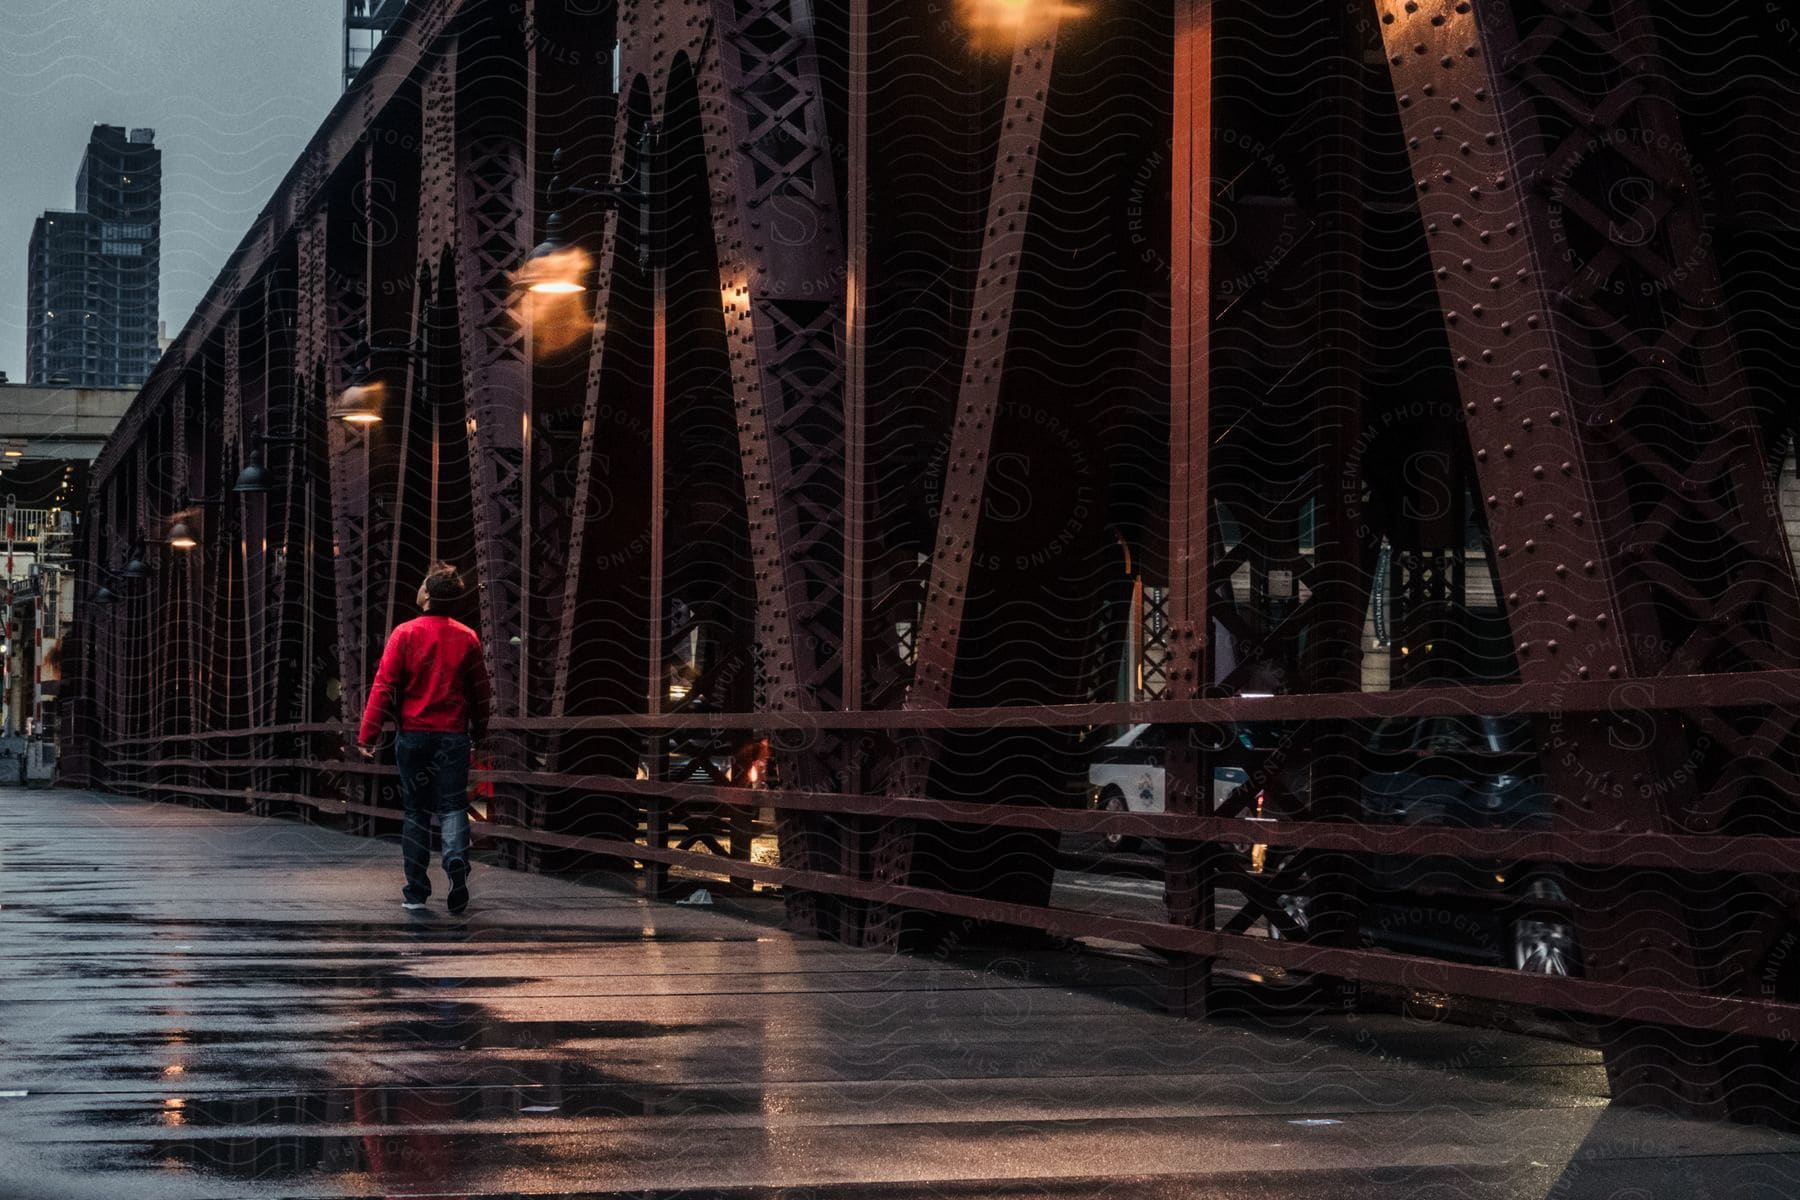 A woman walks across a bridge into town as lights shines on the wet pavement